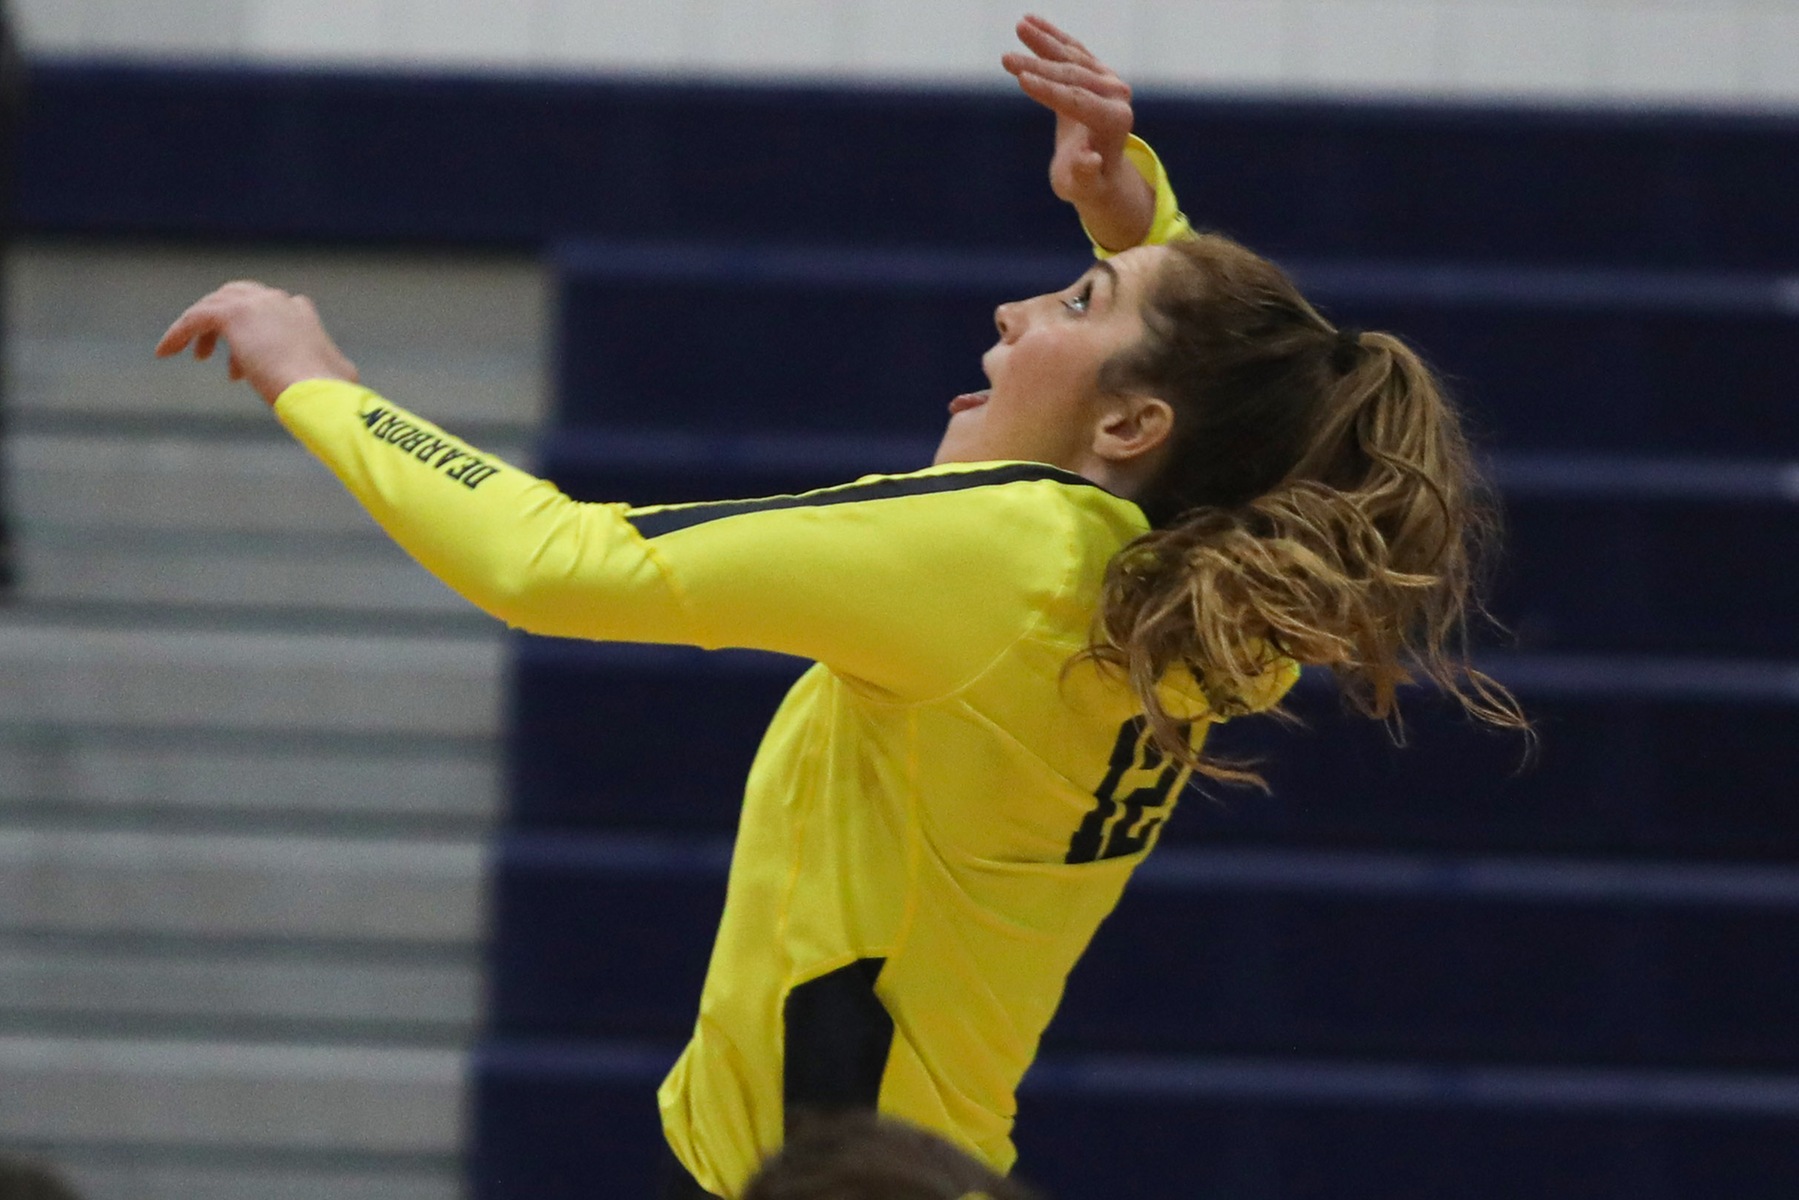 Wolverines take down rival Madonna in four sets